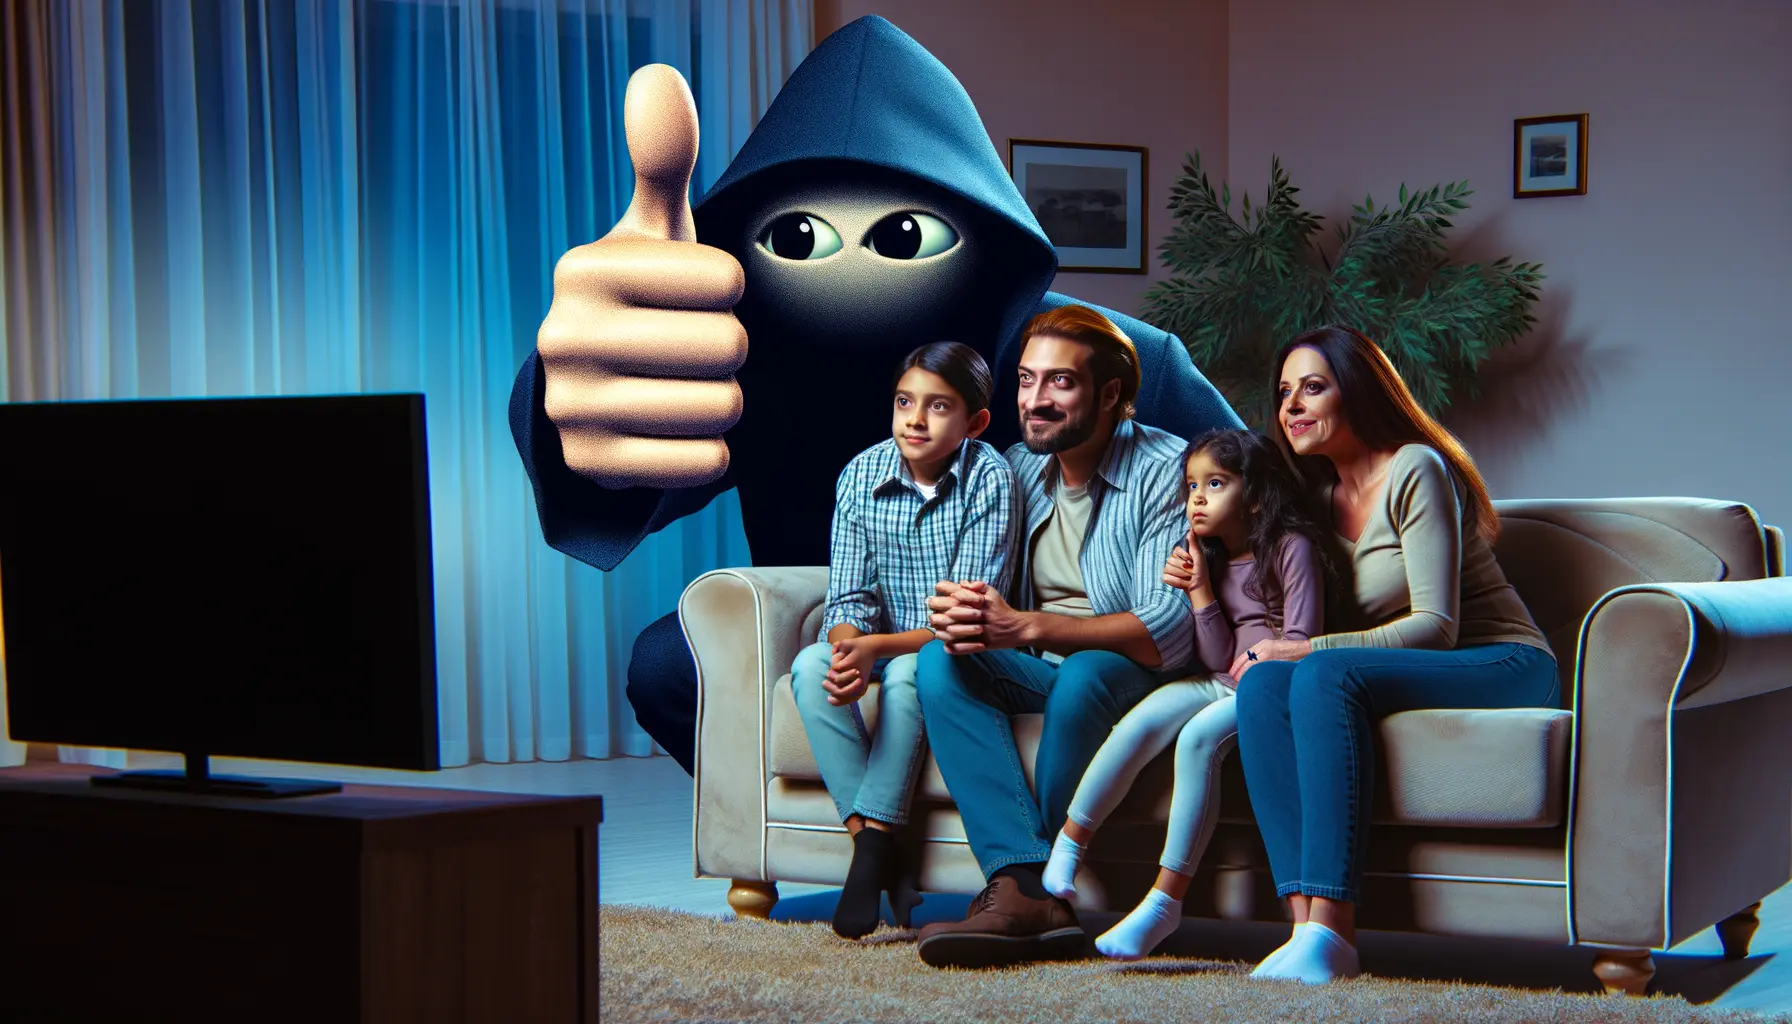 Make a graphic of the Facebook like thumbs up symbol spying on your family while you're watching TV.